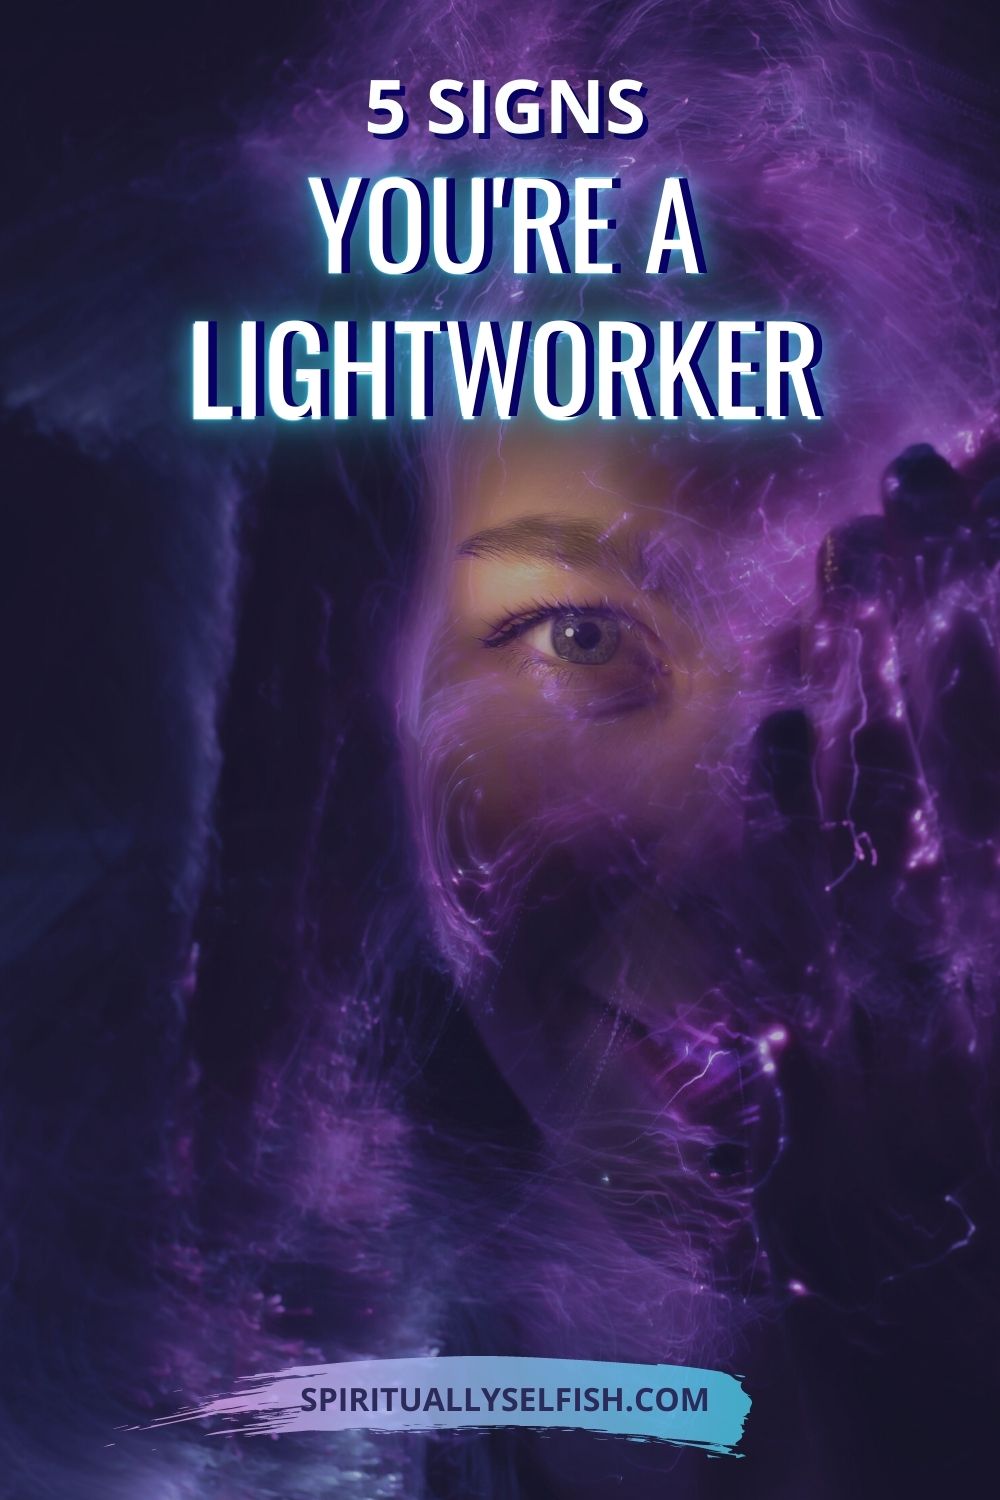 5 Signs You're a Lightworker